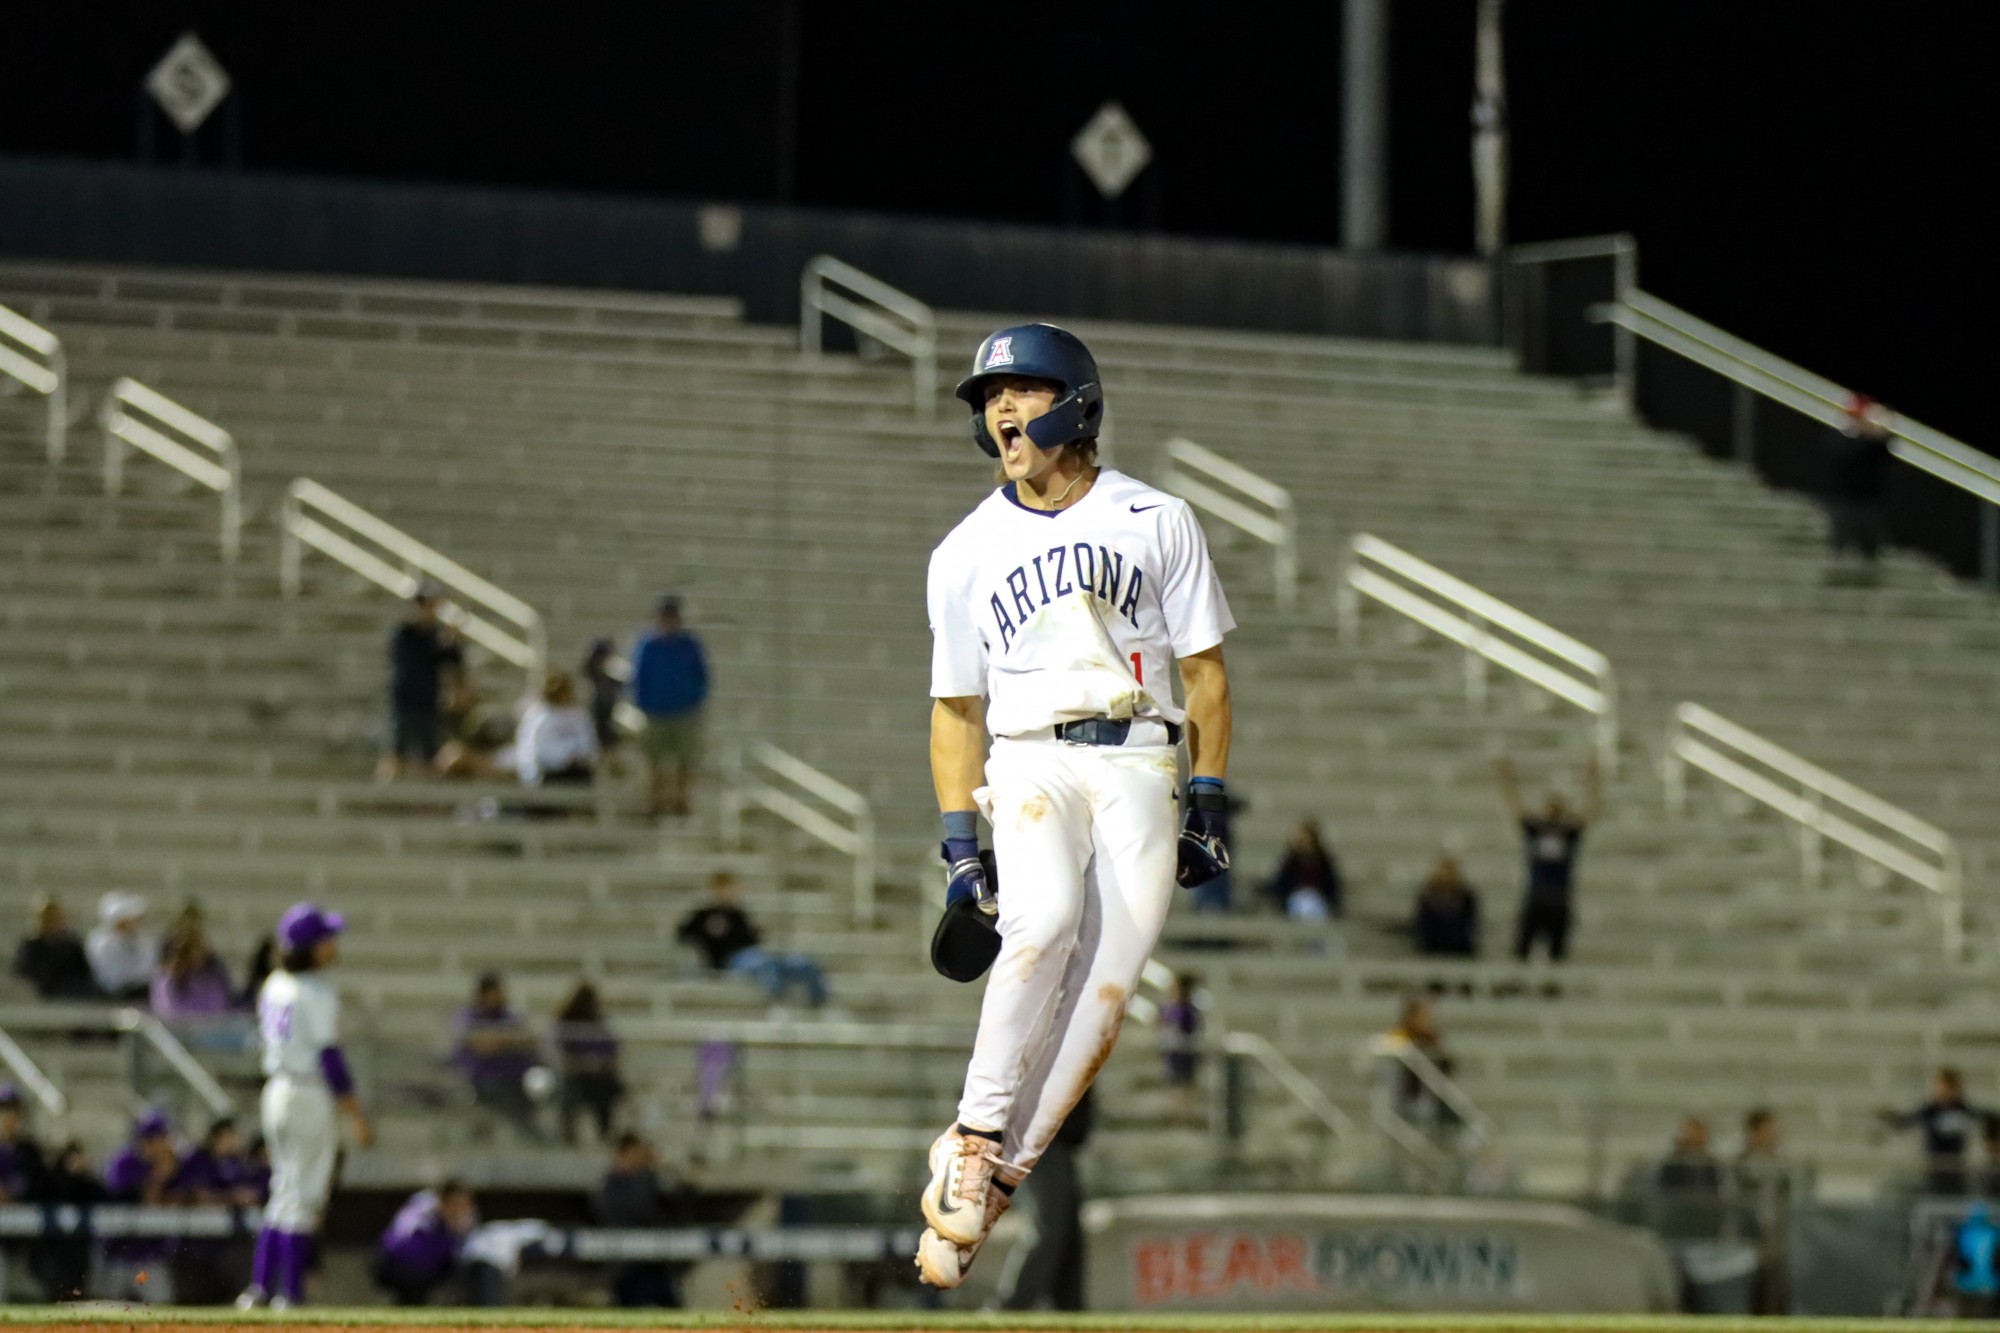 Arizona shortstop Nik McClaughry celebrates a home run in a game against Grand Canyon University on March 28 at Hi Corbett Field. The Wildcats went on to win the game in 10 innings with a score of 10-9.